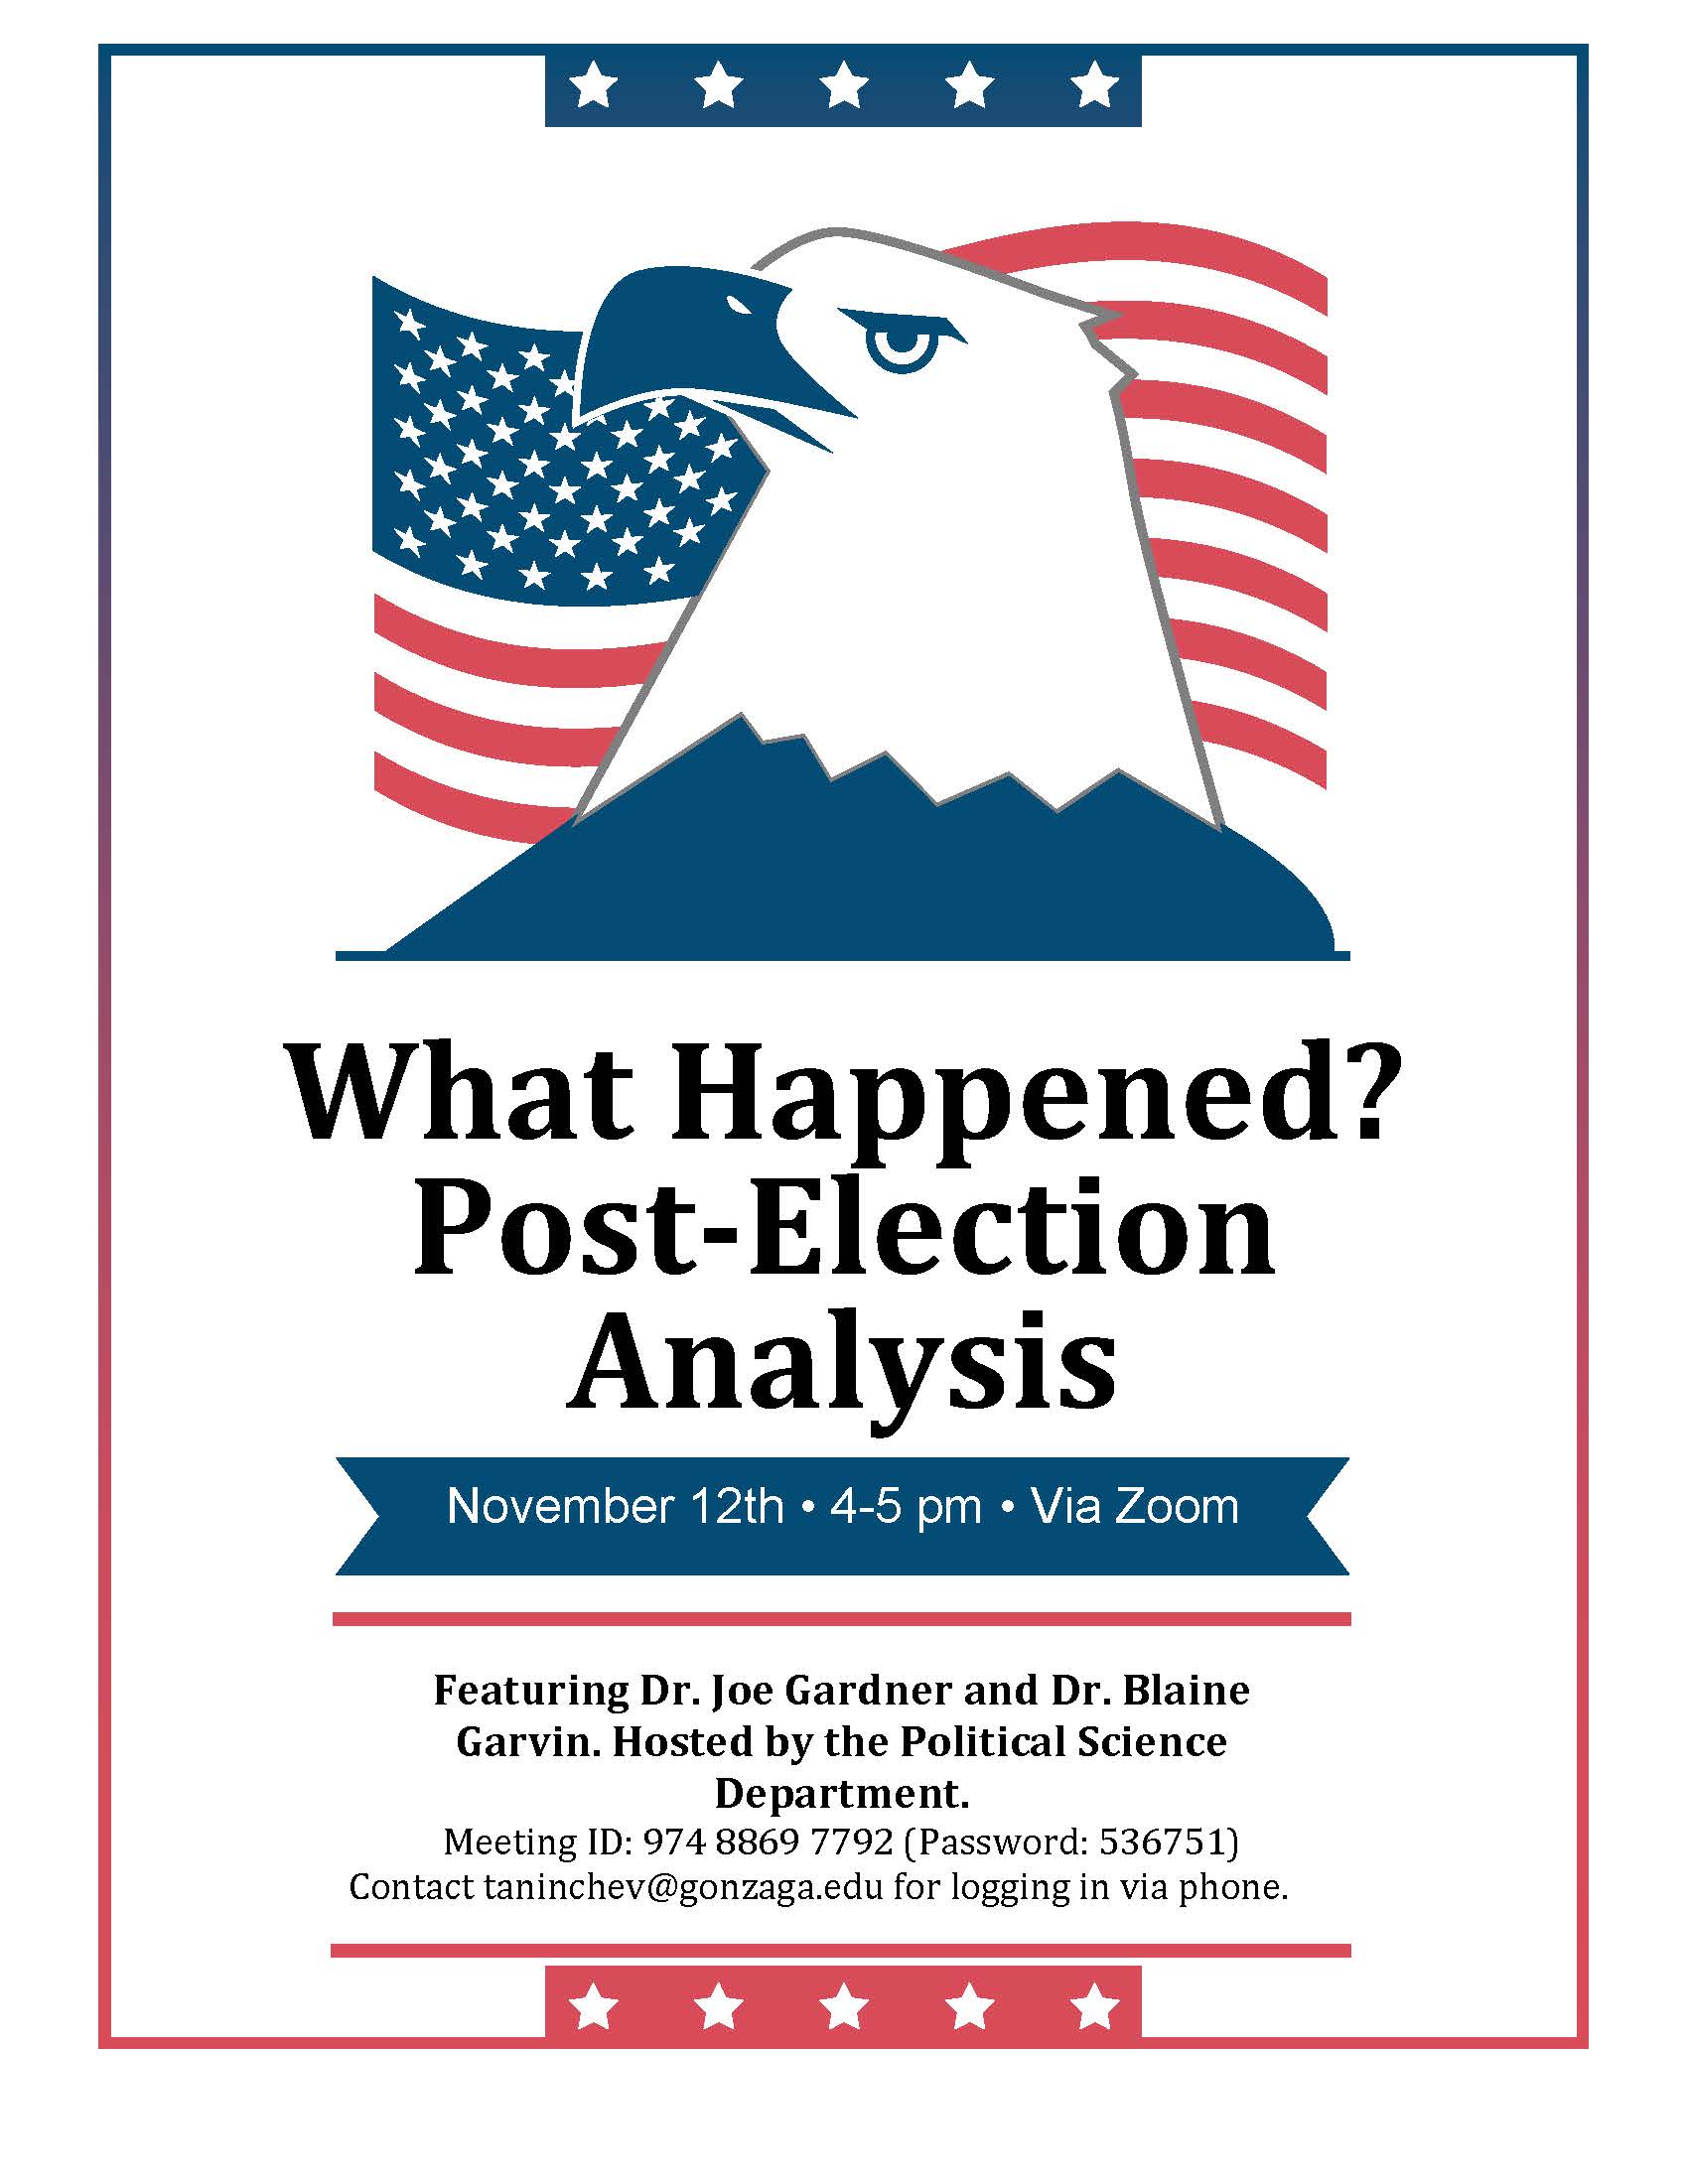 Illustration of bald eagle in front of American flag, with text that reads: "What Happened? Post Election Analysis". November 14, 4-5 PM.